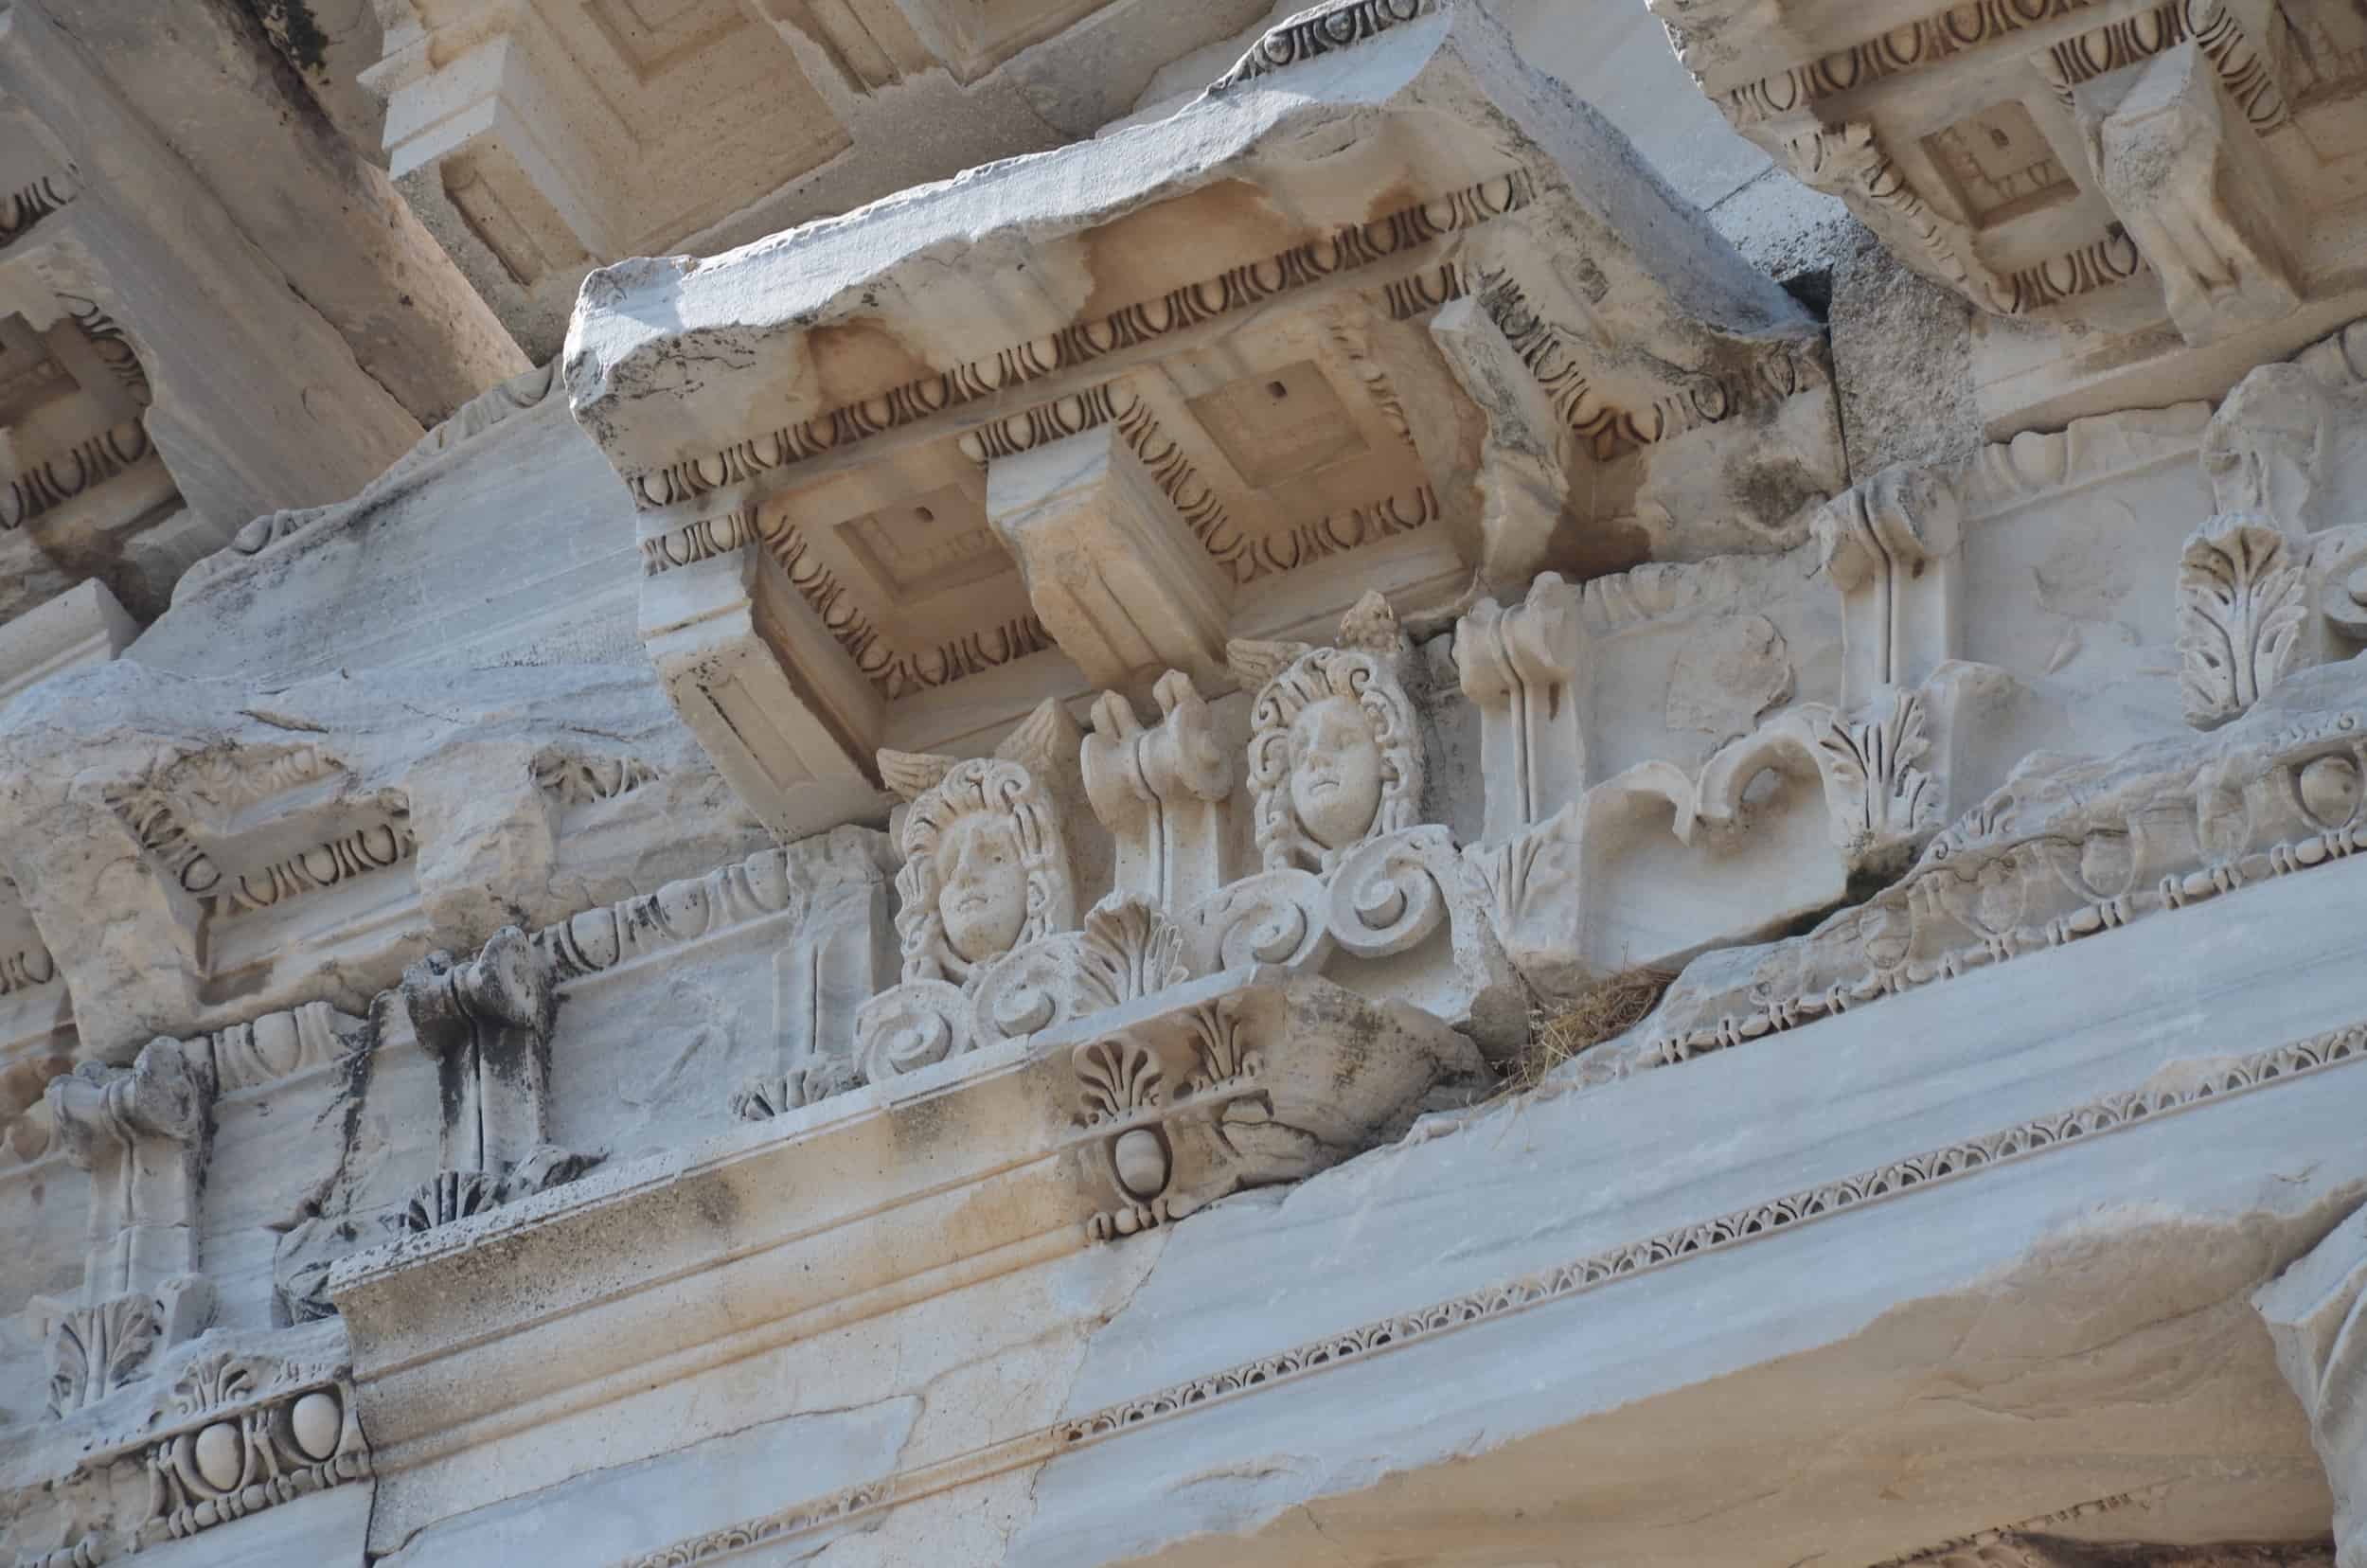 Relief sculptures on the pediment of the Temple of Trajan